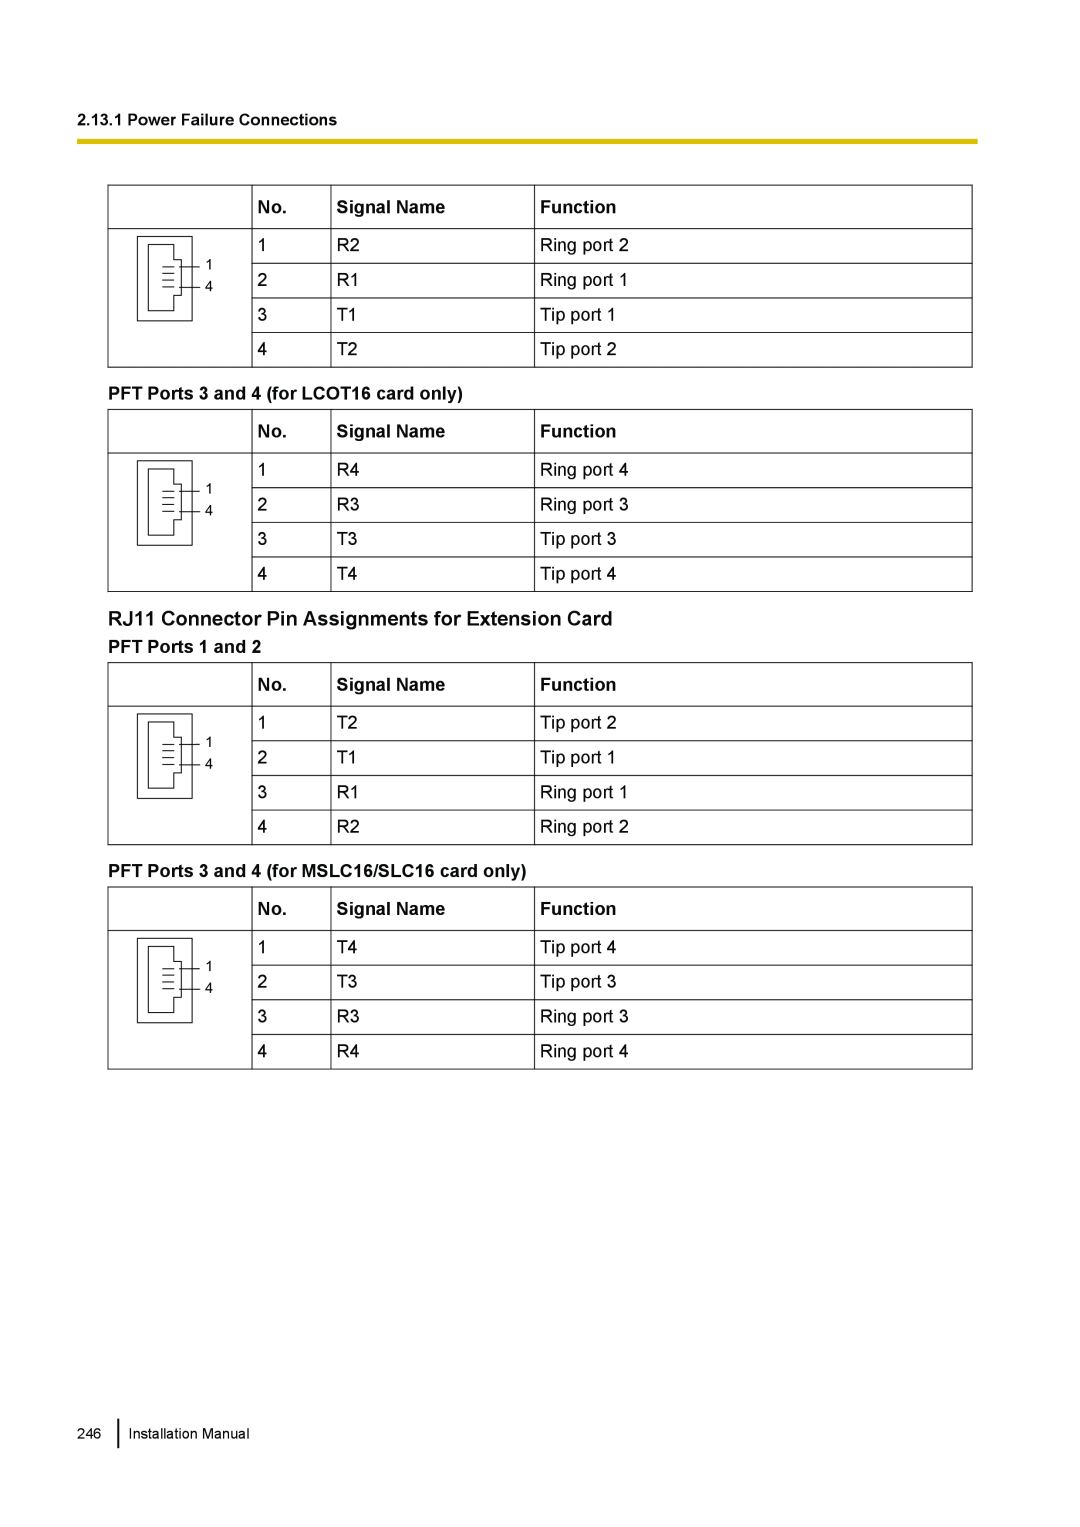 Panasonic KX-TDA100 RJ11 Connector Pin Assignments for Extension Card, Signal Name, Function, PFT Ports 1 and 